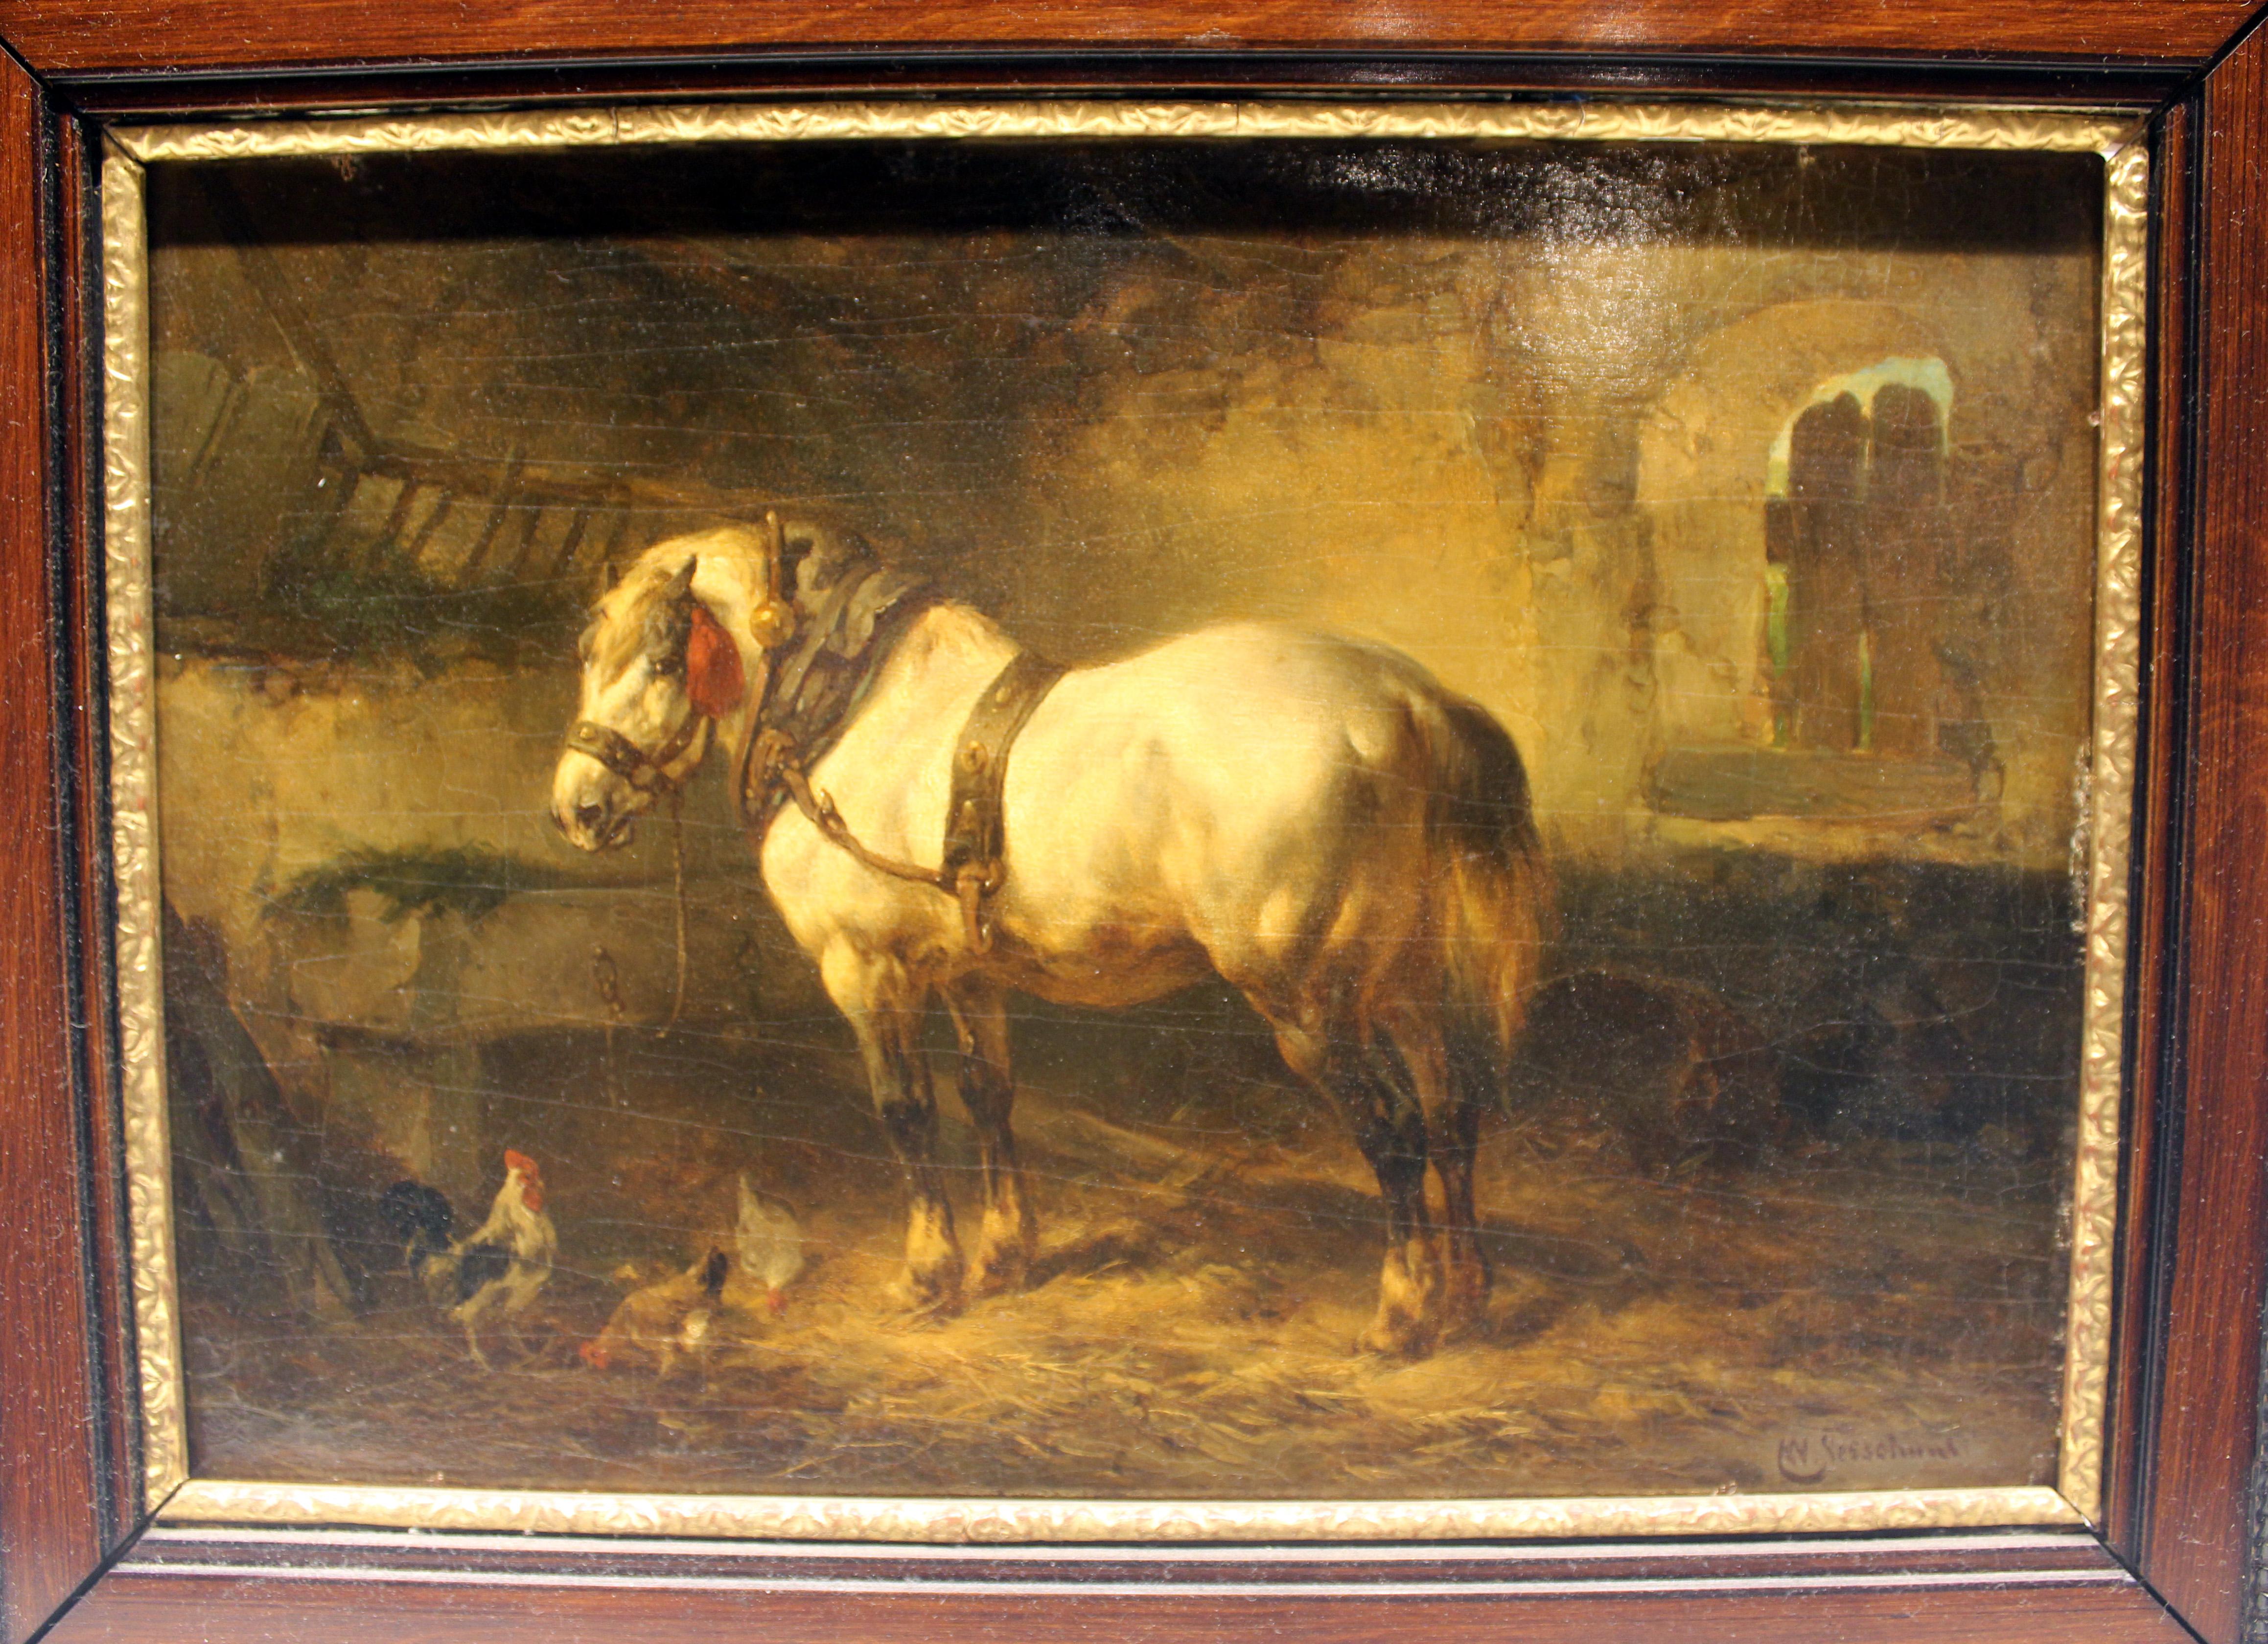 19th century Dutch painting by Wouterur Verschuur of Horse and Chickens in Barn.
This is done by the father not the son.